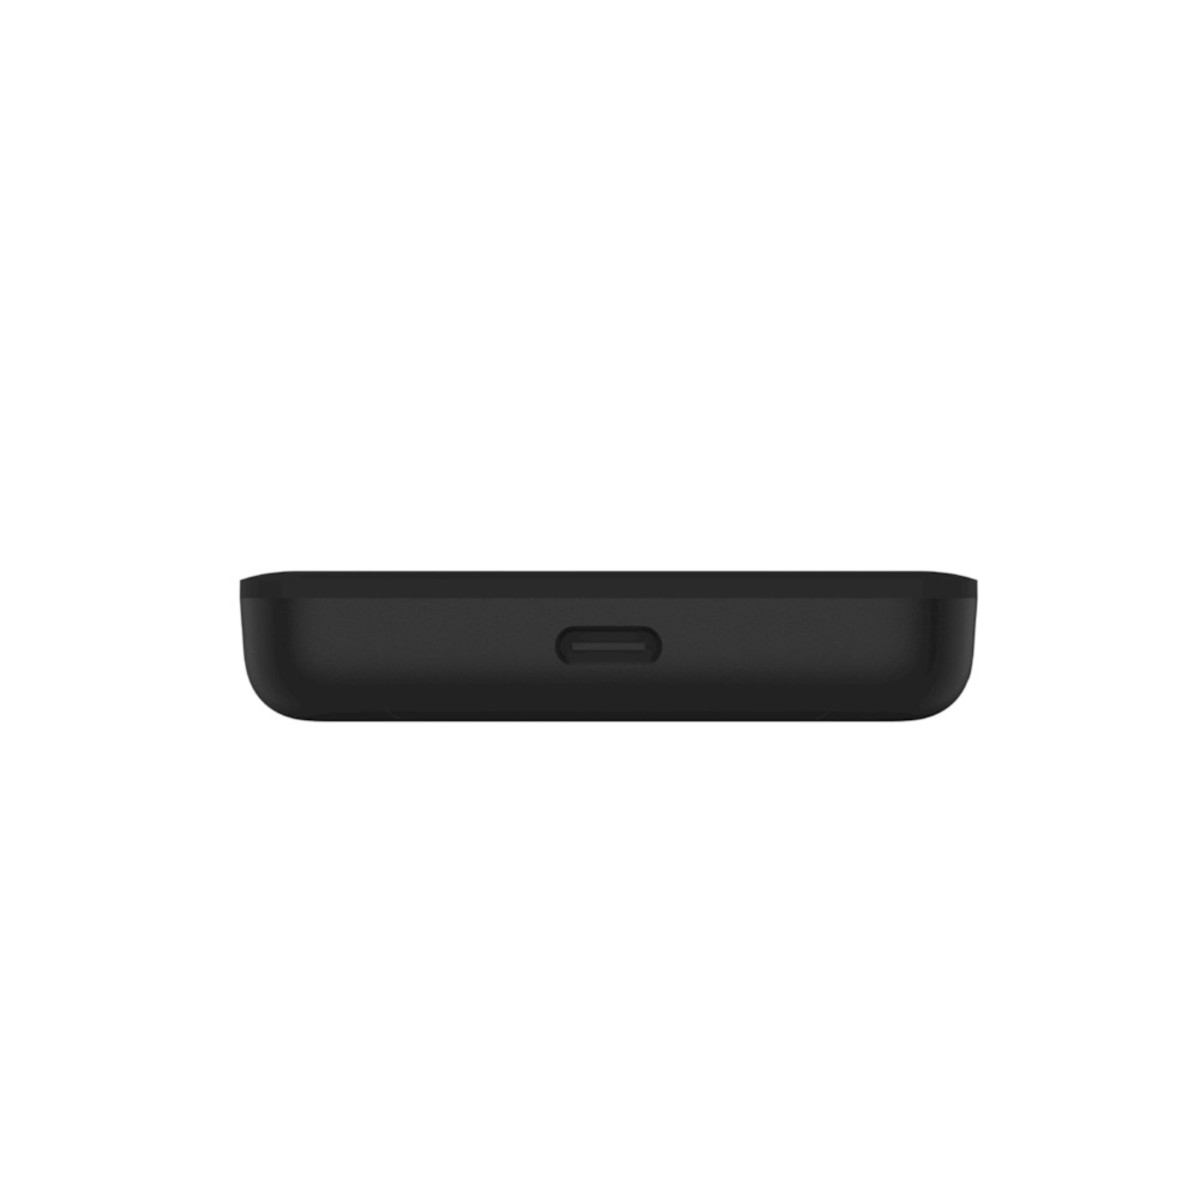 Power Bank Magnetic Wireless BLK